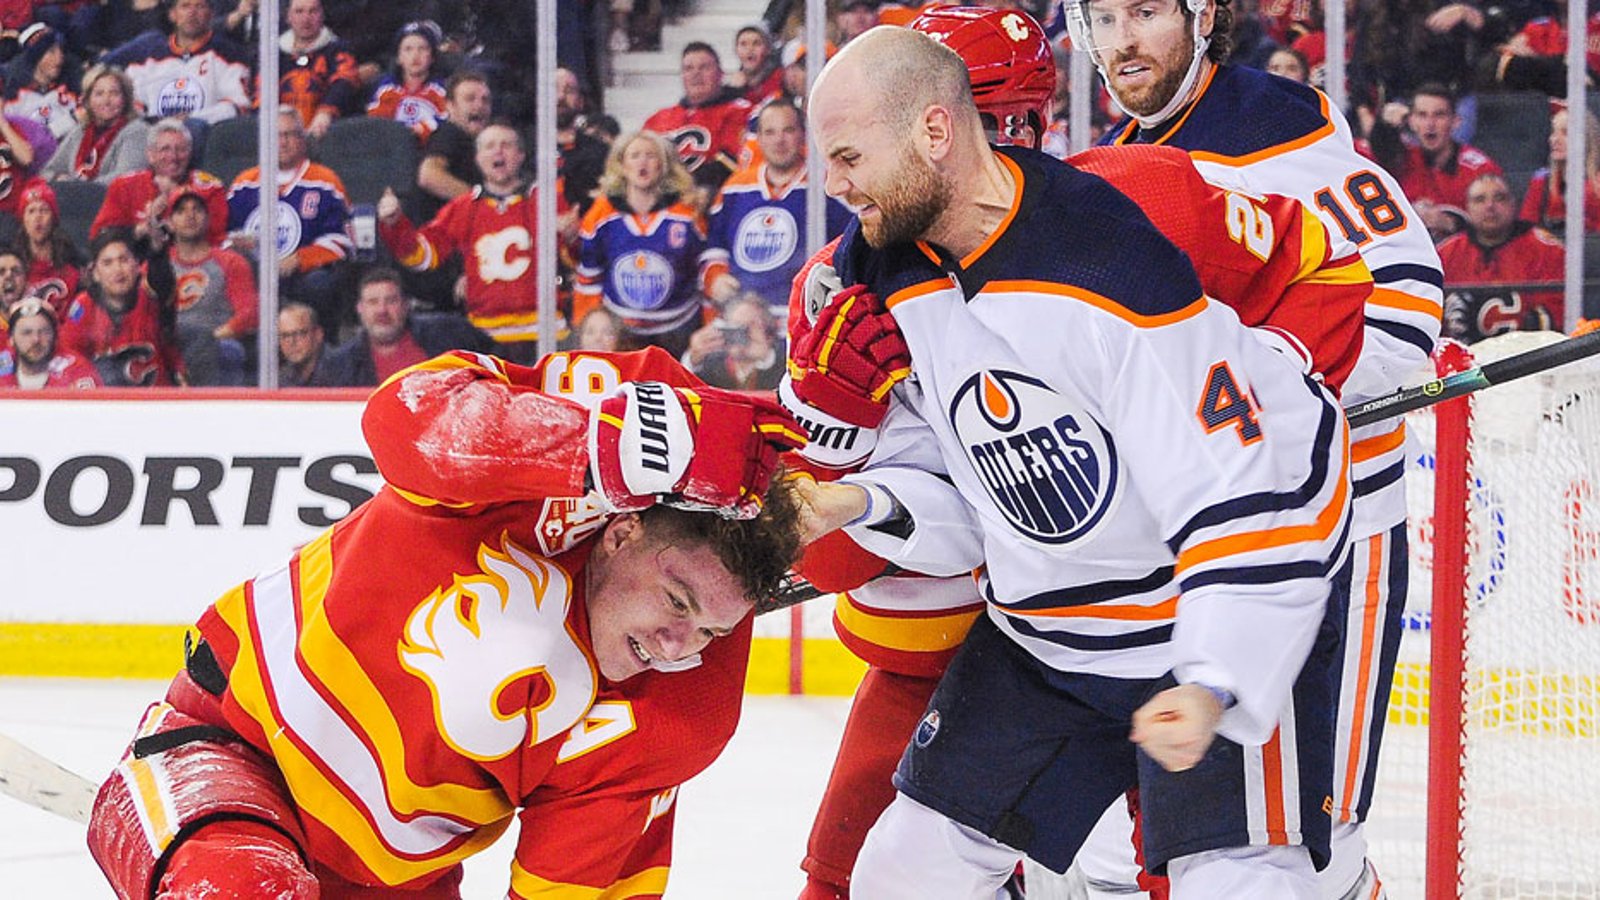 Former Flames enforcer weighs in on Tkachuk and Kassian feud